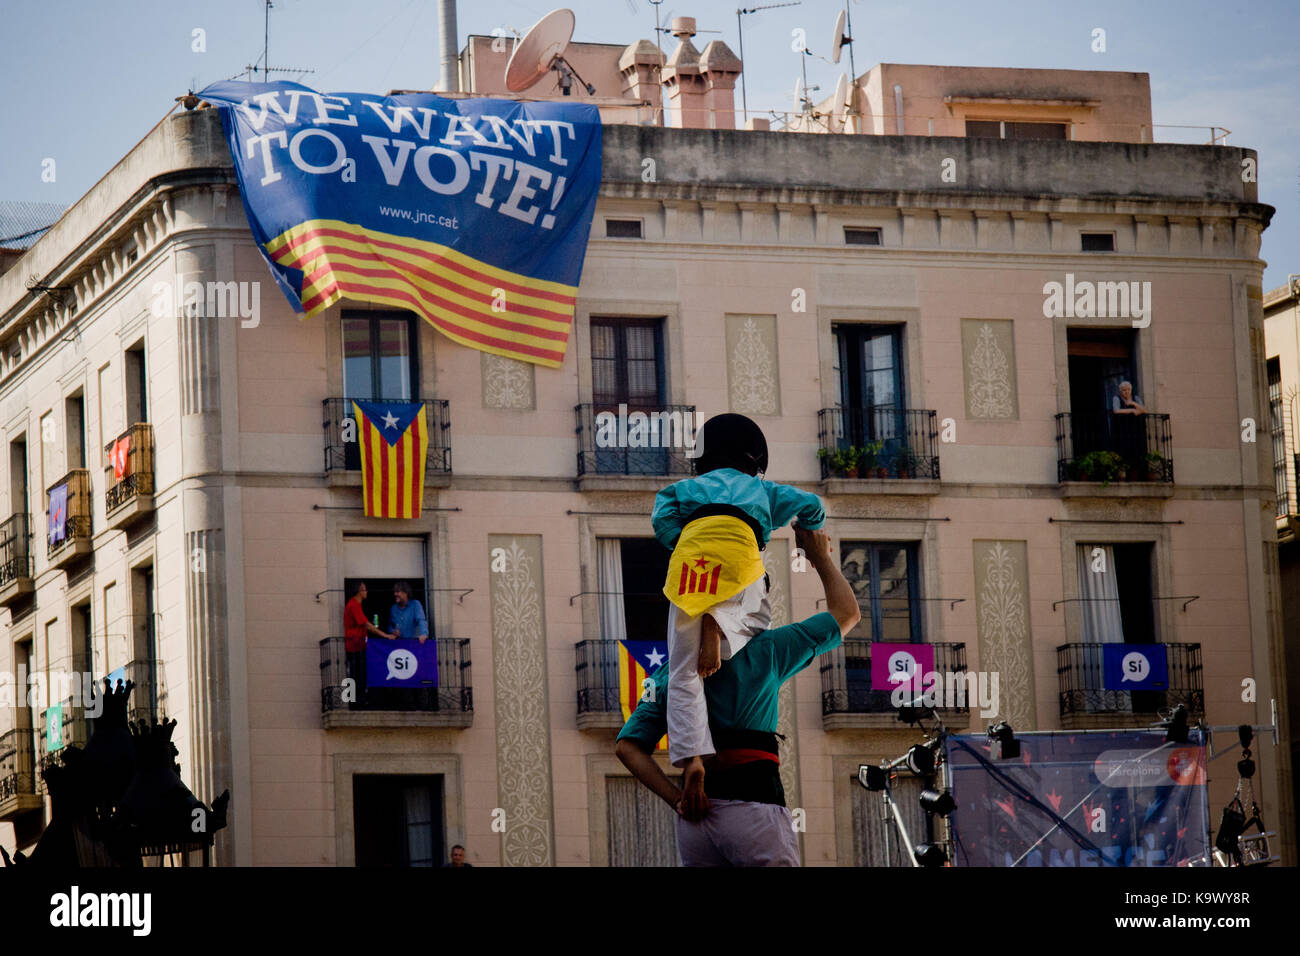 Barcelona, Catalonia, Spain. 24th Sep, 2017. Castellers building a human tower as a banners reading 'we want to vote' hangs from a building during La Merce festival in Barcelona. Catalan separatists and the Catalonia's government continue their campaign towards the referendum of October 1 despite the crackdown carried out by the Spanish government. Over 4,000 members of the Spanish National Police and Civil Guards are being transferred to Catalonia these days. Catalan government aims to celebrate a referendum on independence next first october, the Spanish government is frontally oppos Stock Photo